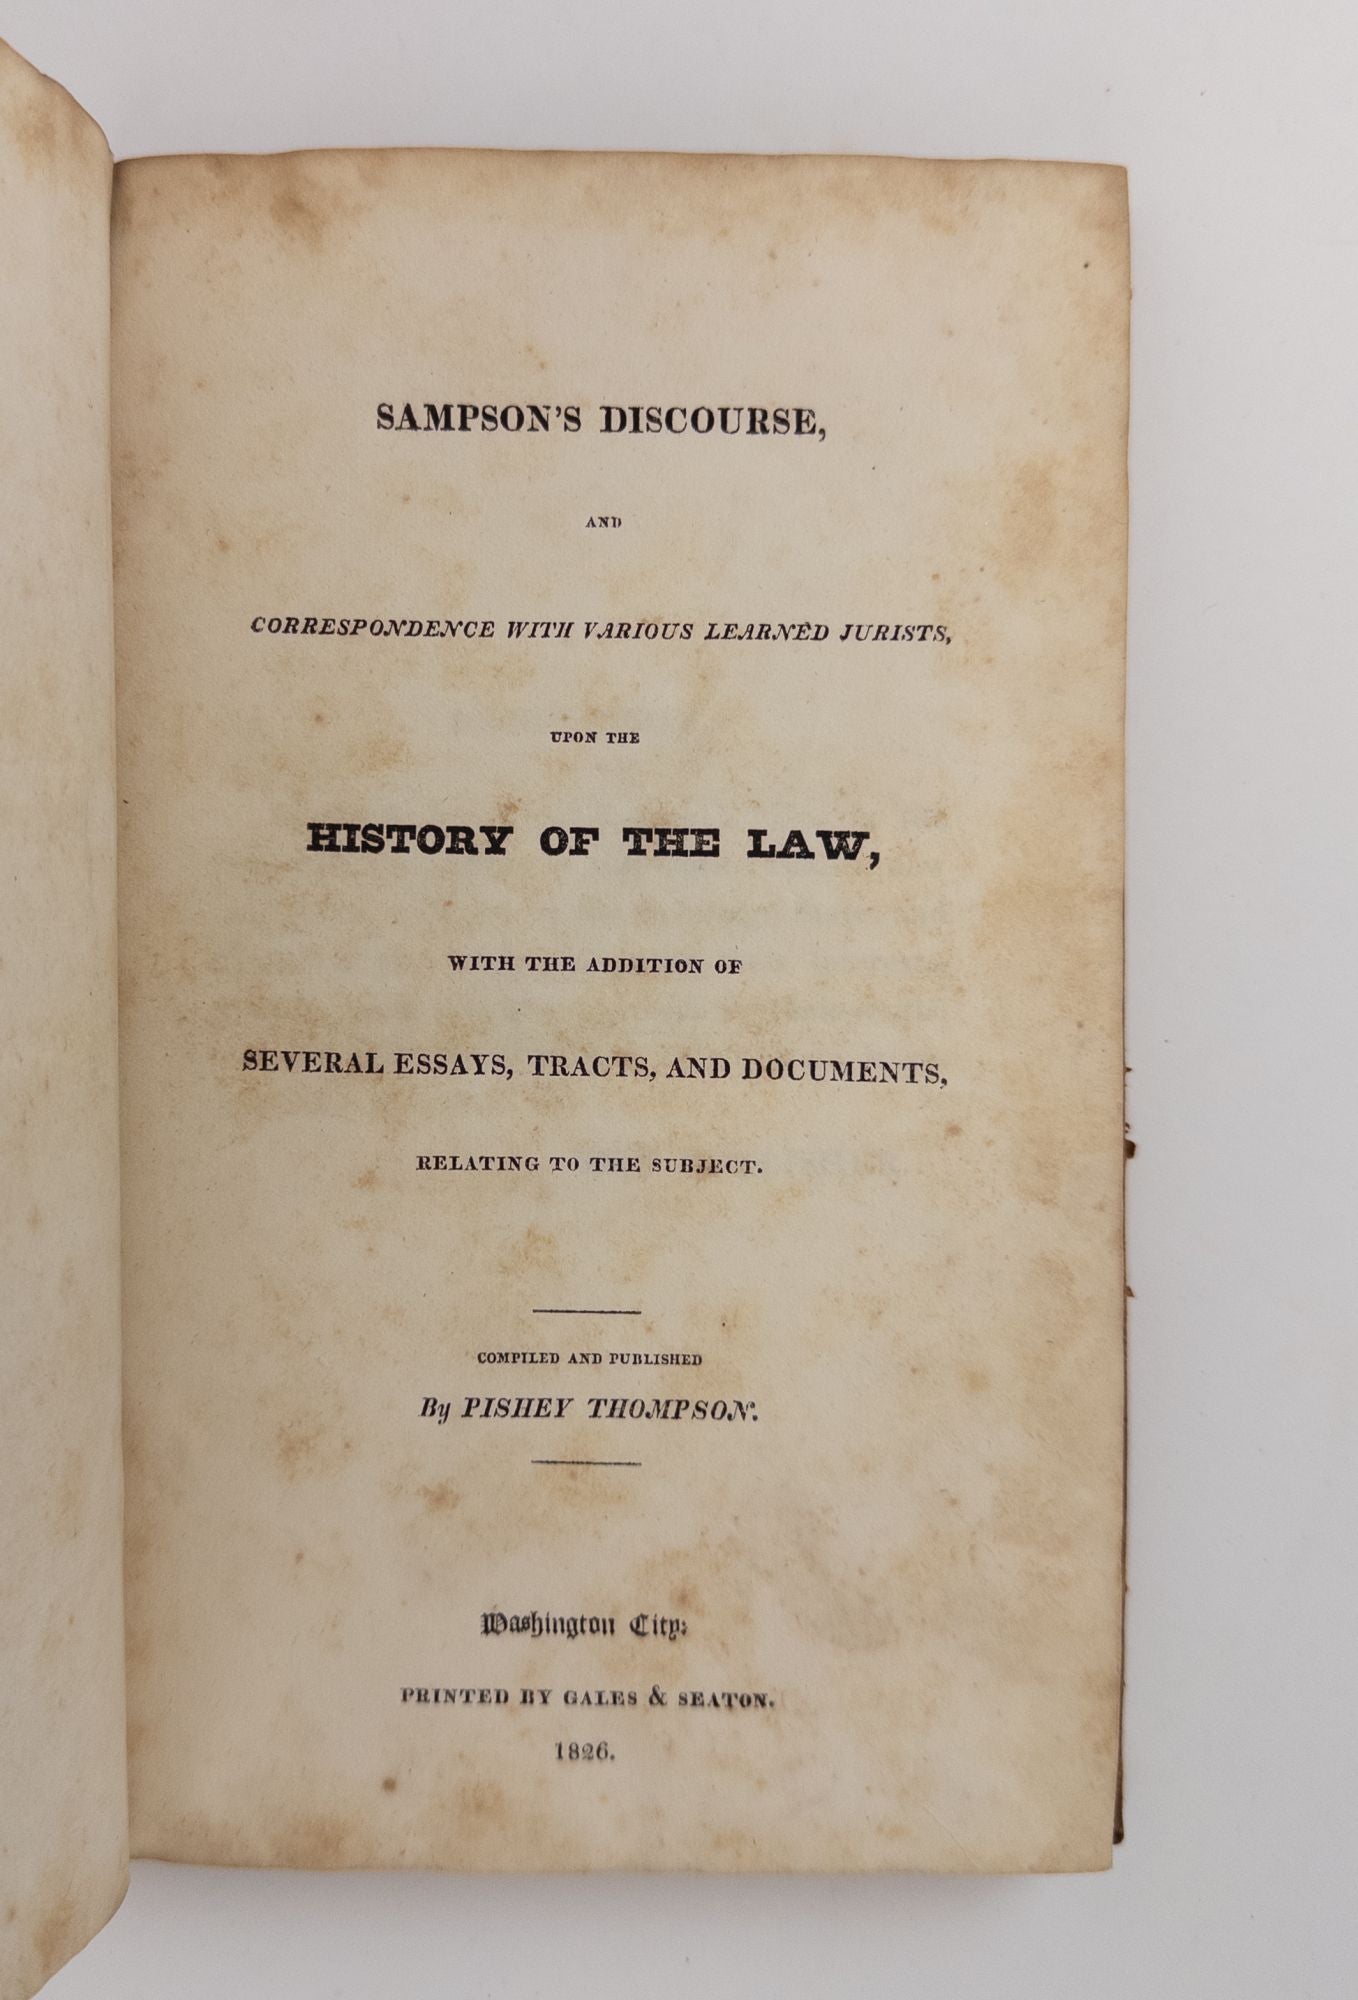 Product Image for SAMPSON'S DISCOURSE, AND CORRESPONDENCE WITH VARIOUS LEARNED JURISTS, UPON THE HISTORY OF LAW, WITH THE ADDITION OF SEVERAL ESSAYS, TRACTS, AND DOCUMENTS, RELATING TO THE SUBJECT